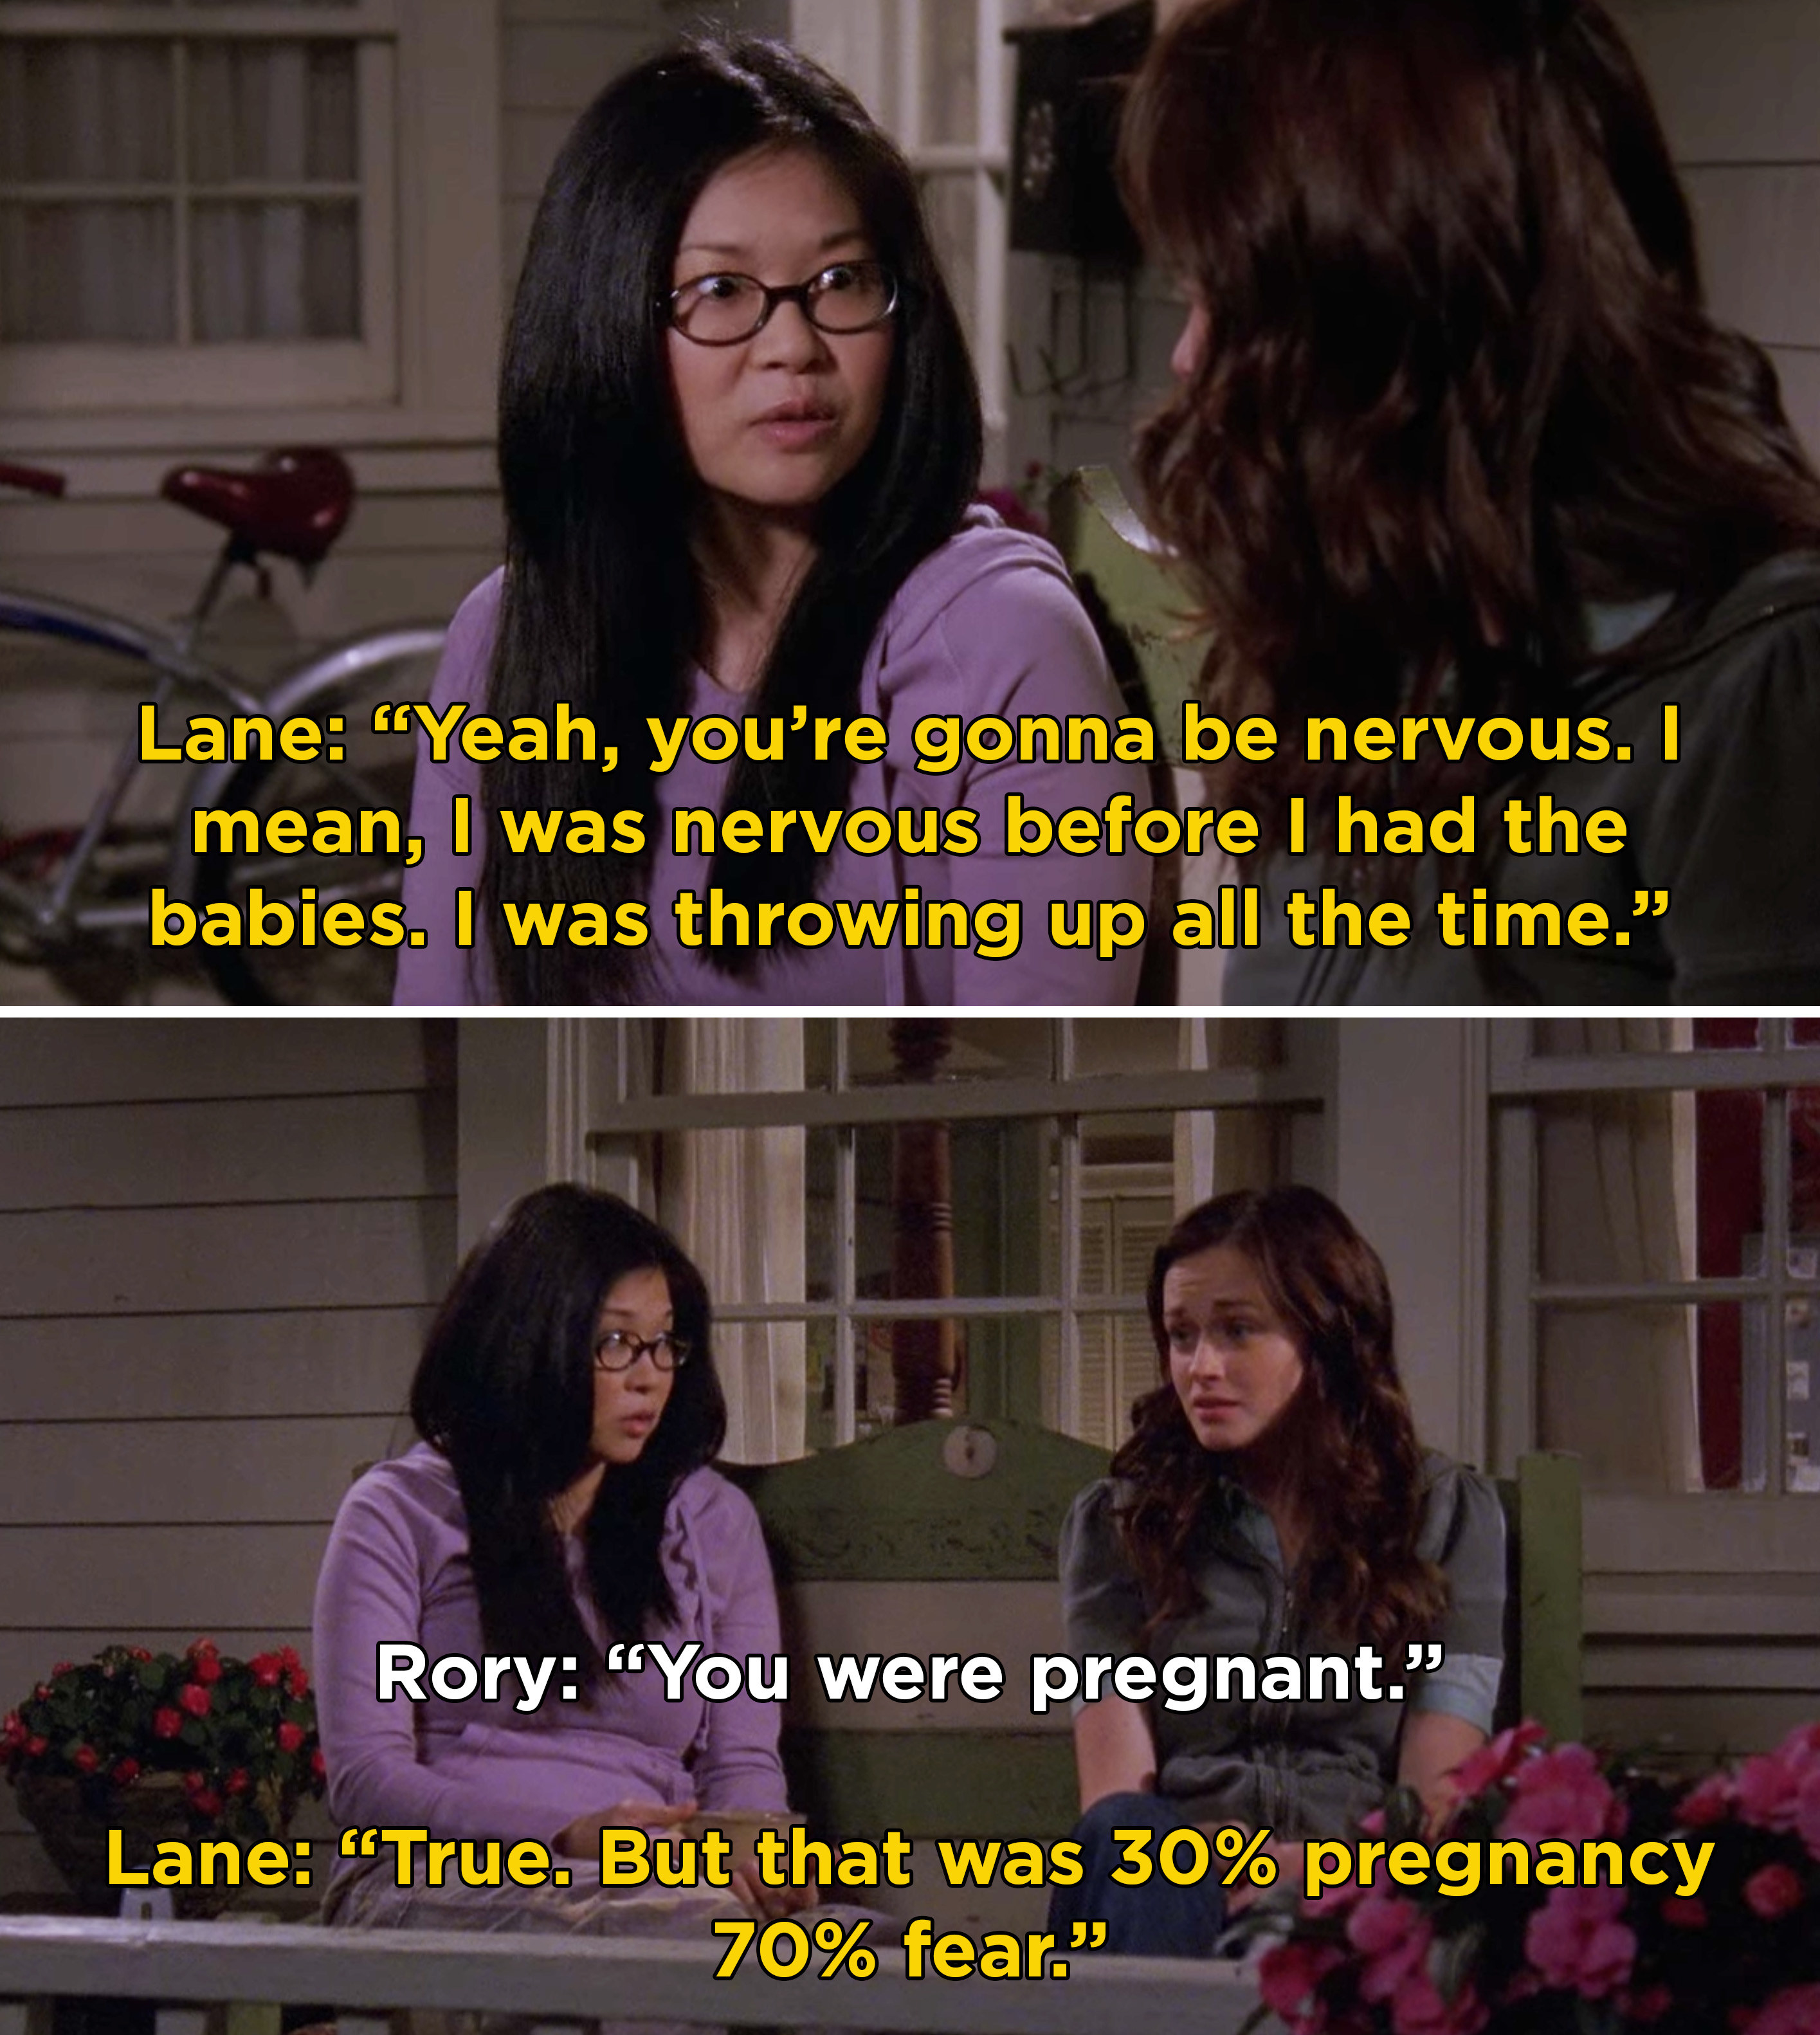 Lane telling Rory that she was super nervous before her babies were born